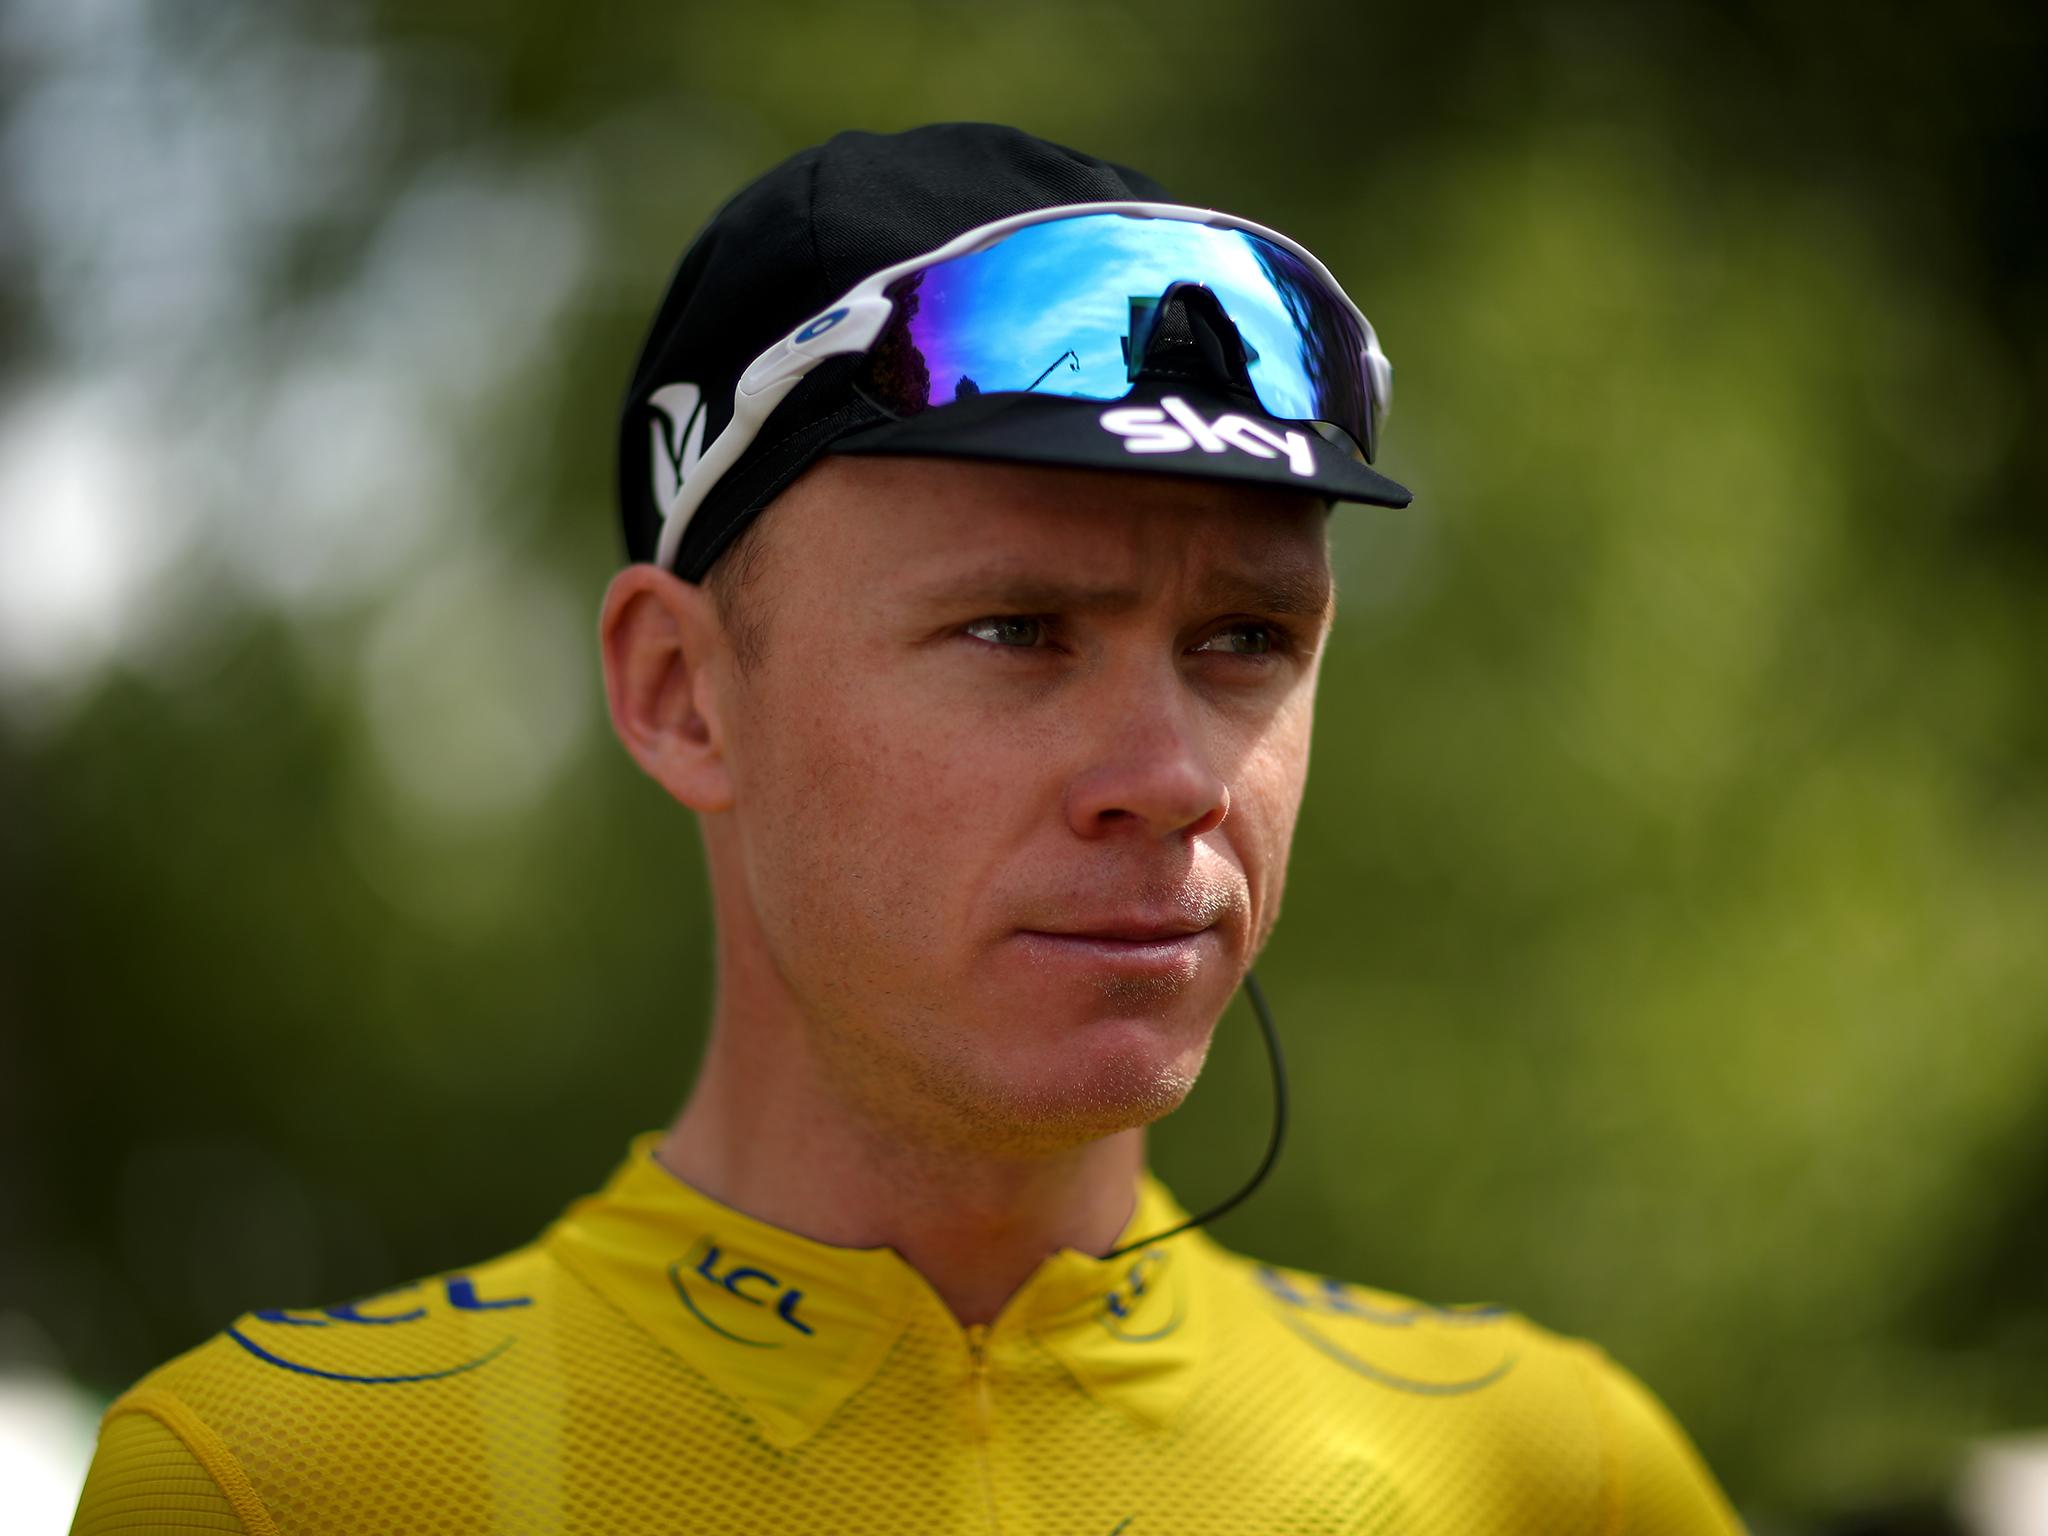 The investigation into Chris Froome's adverse drugs test could drag on into the 2018 Giro d'Italia